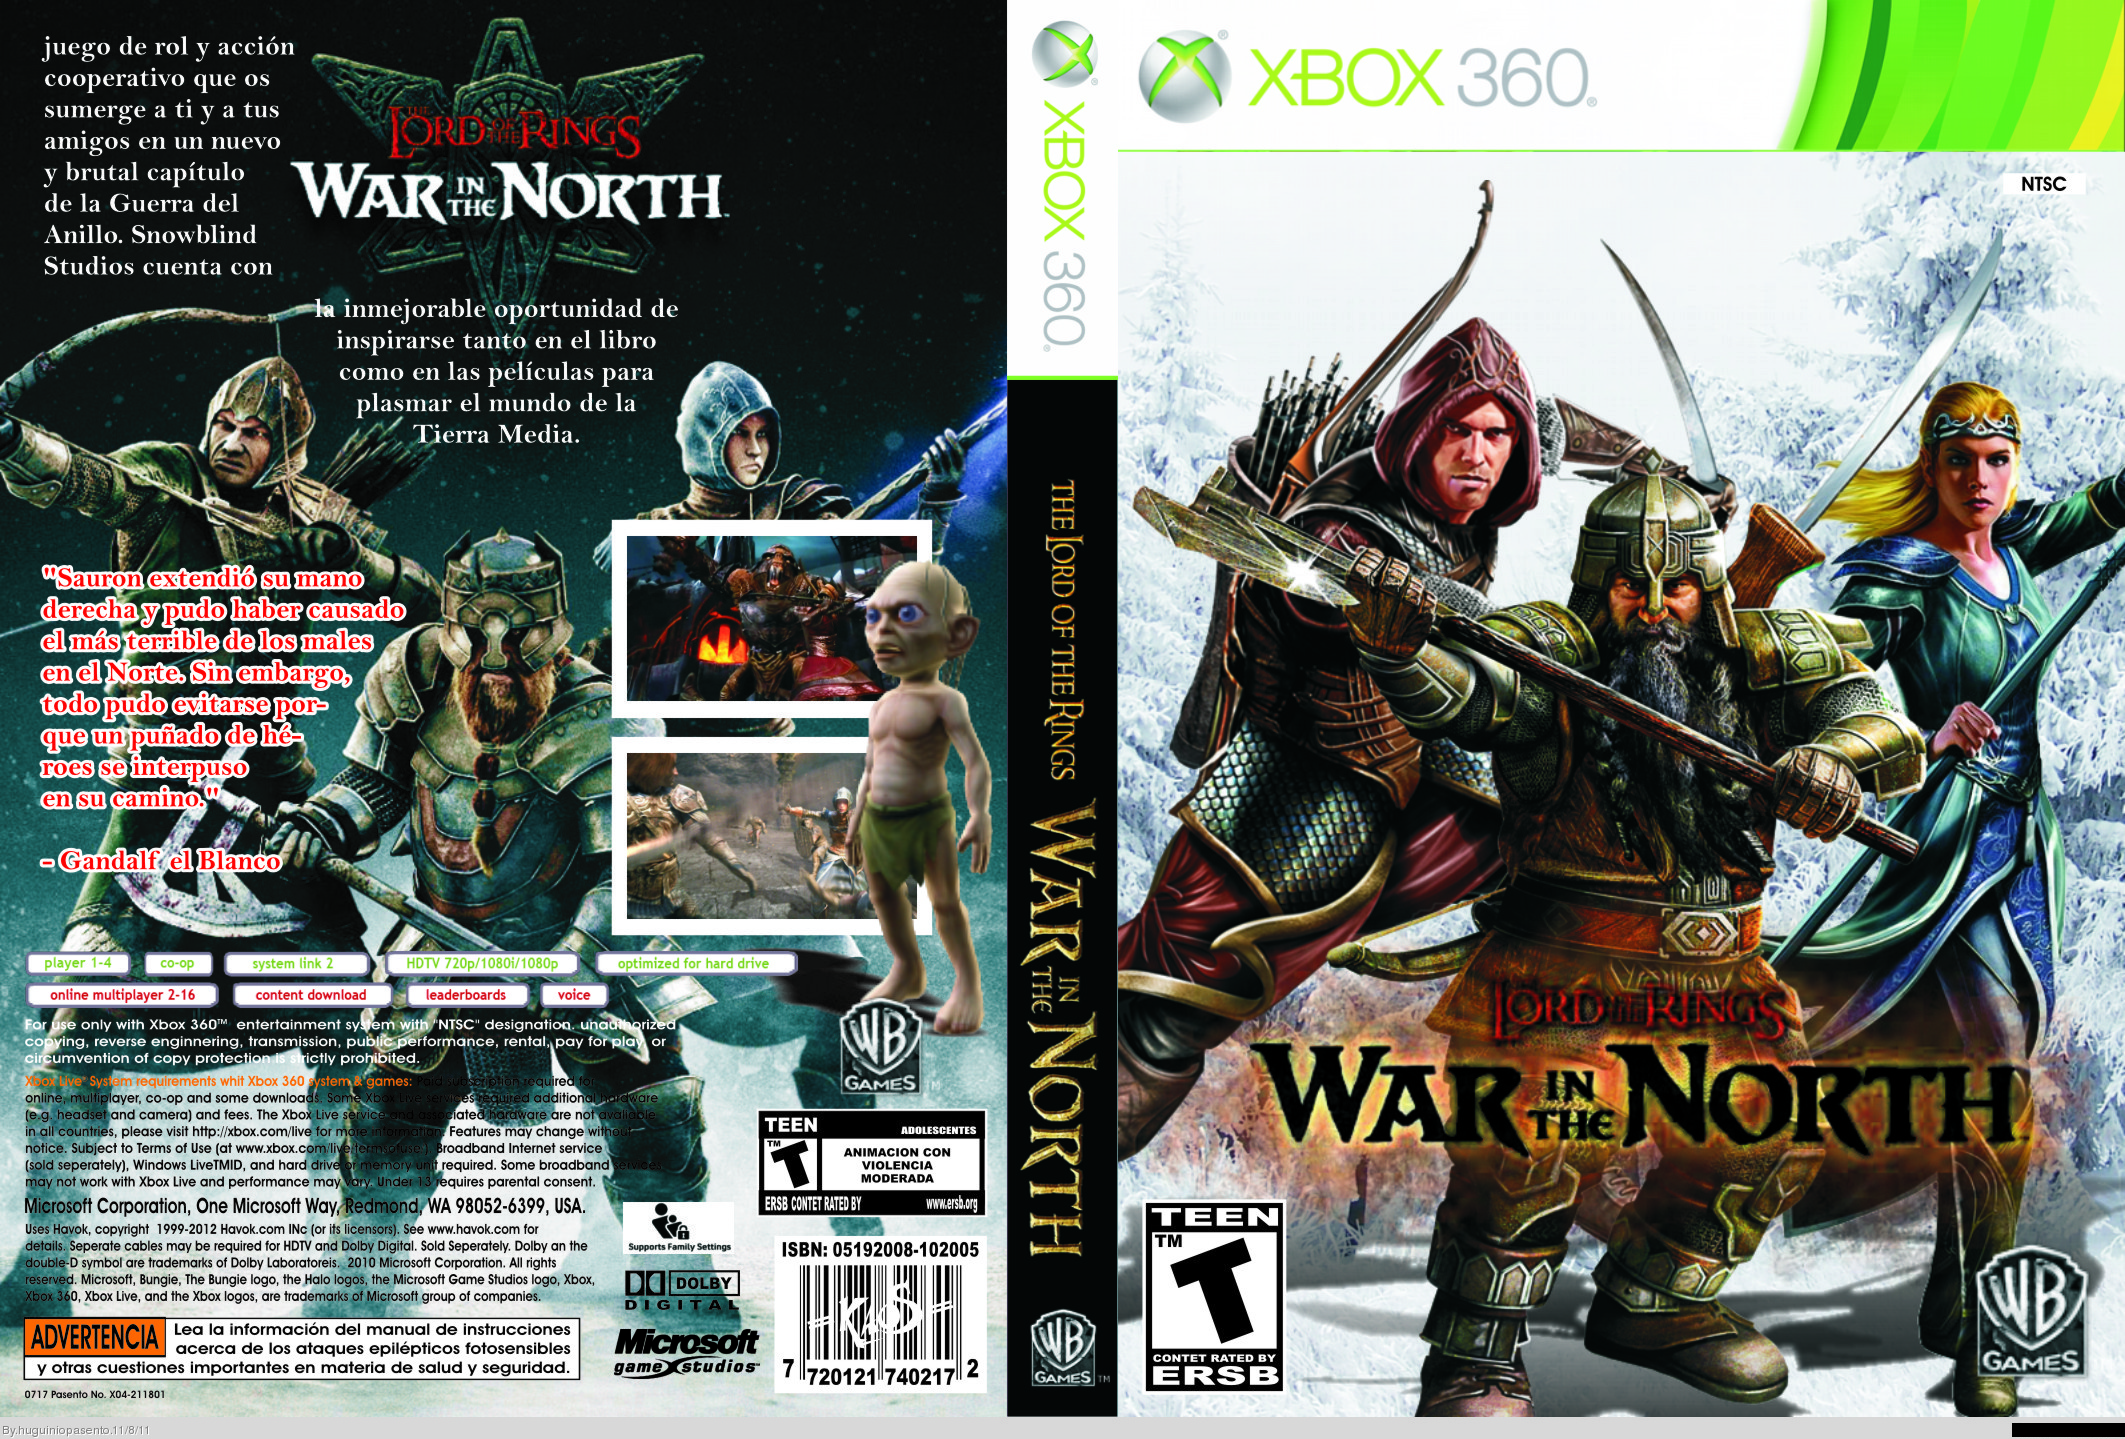 Lord Of The Rings War In The North box cover